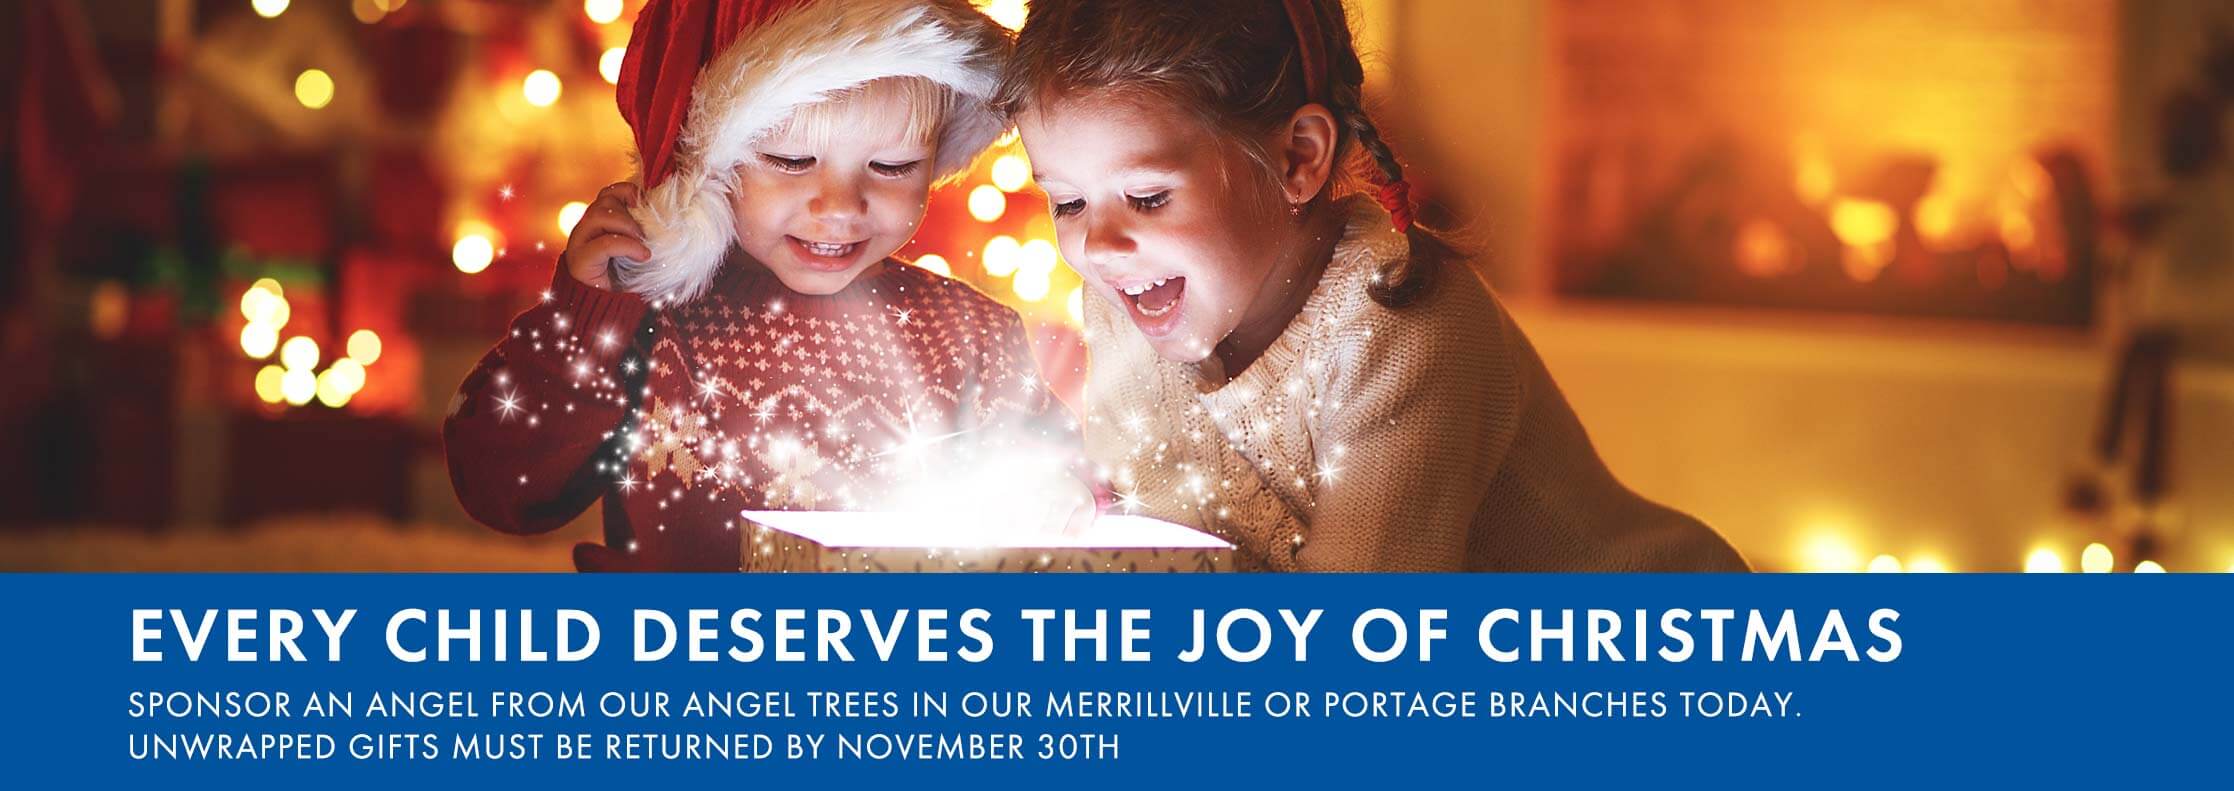 Every child deserves the joy of christmas Sponsor an angel from our angel  trees in our Merrillville or Portage  branches today. Unwrapped gifts must  be returned by November 30th